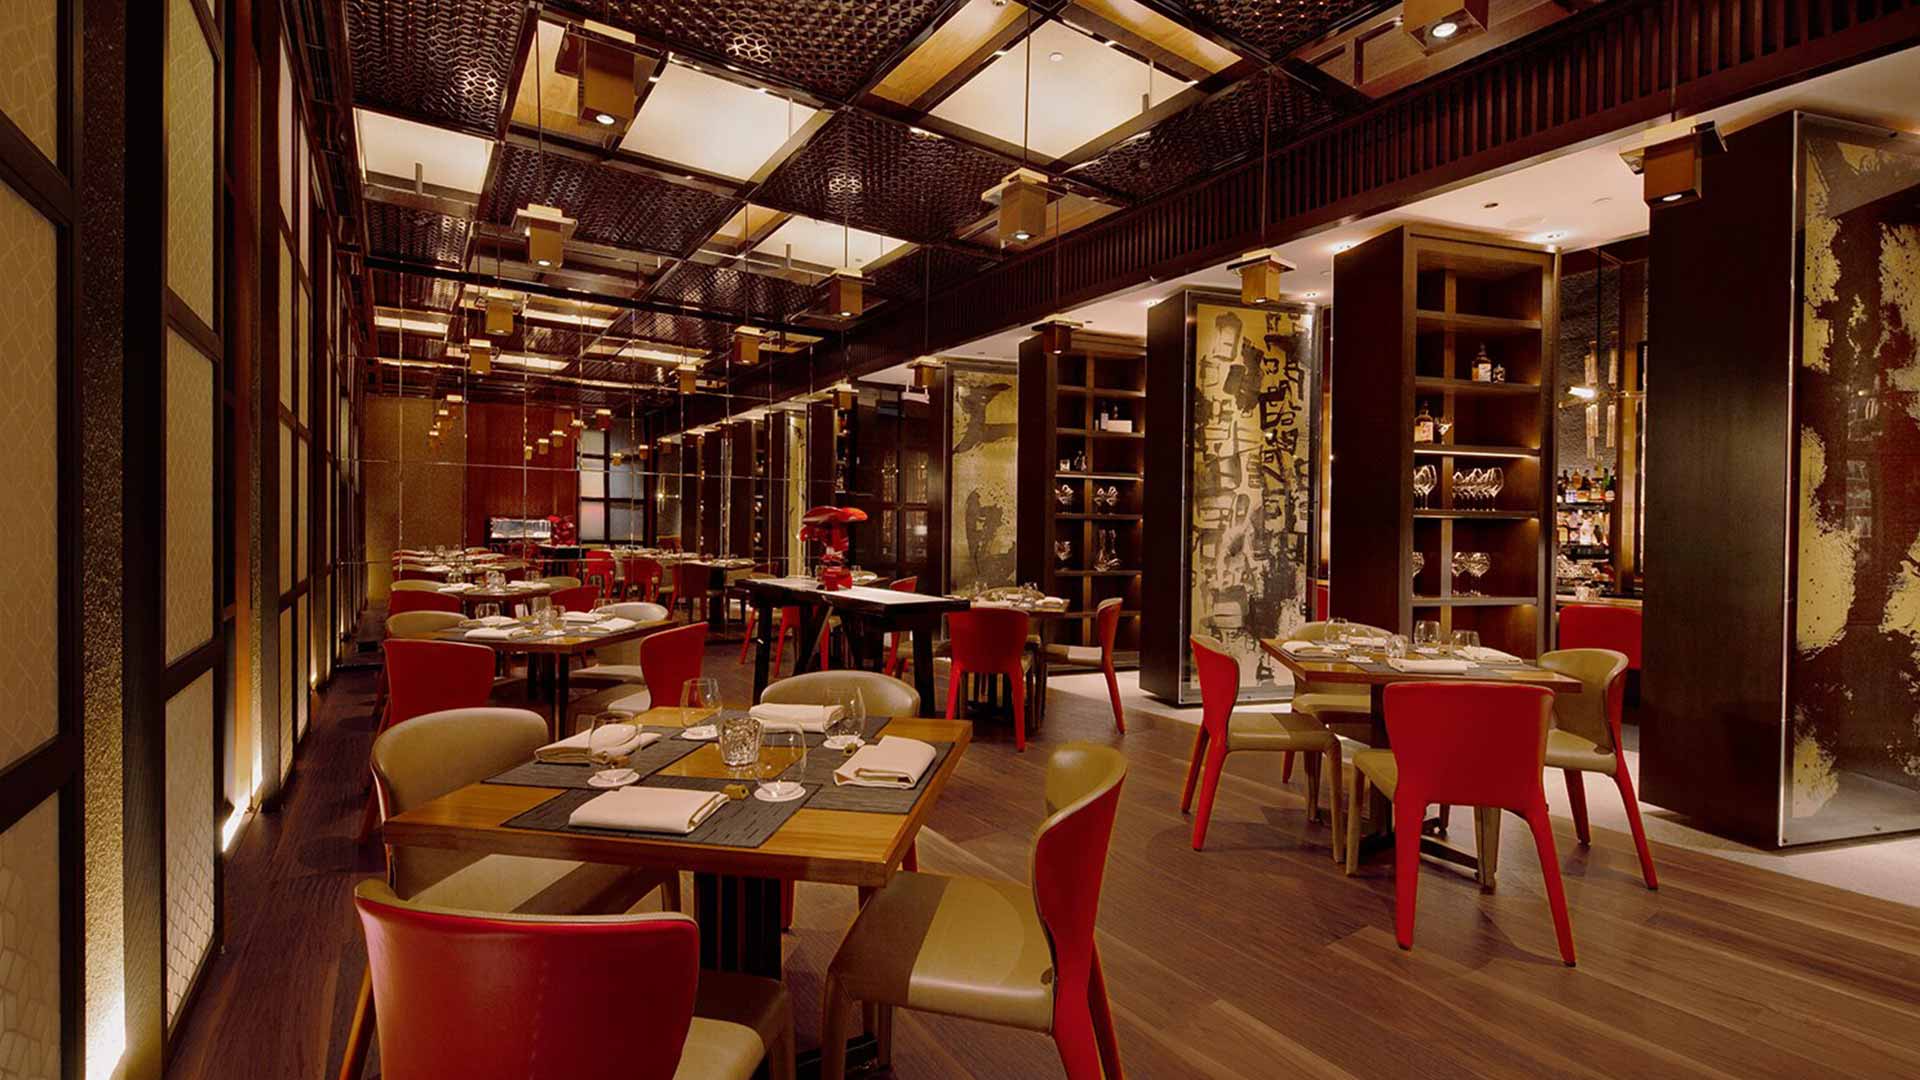 Dining area of Waku Ghin, a fine dining Japanese restaurant in Singapore